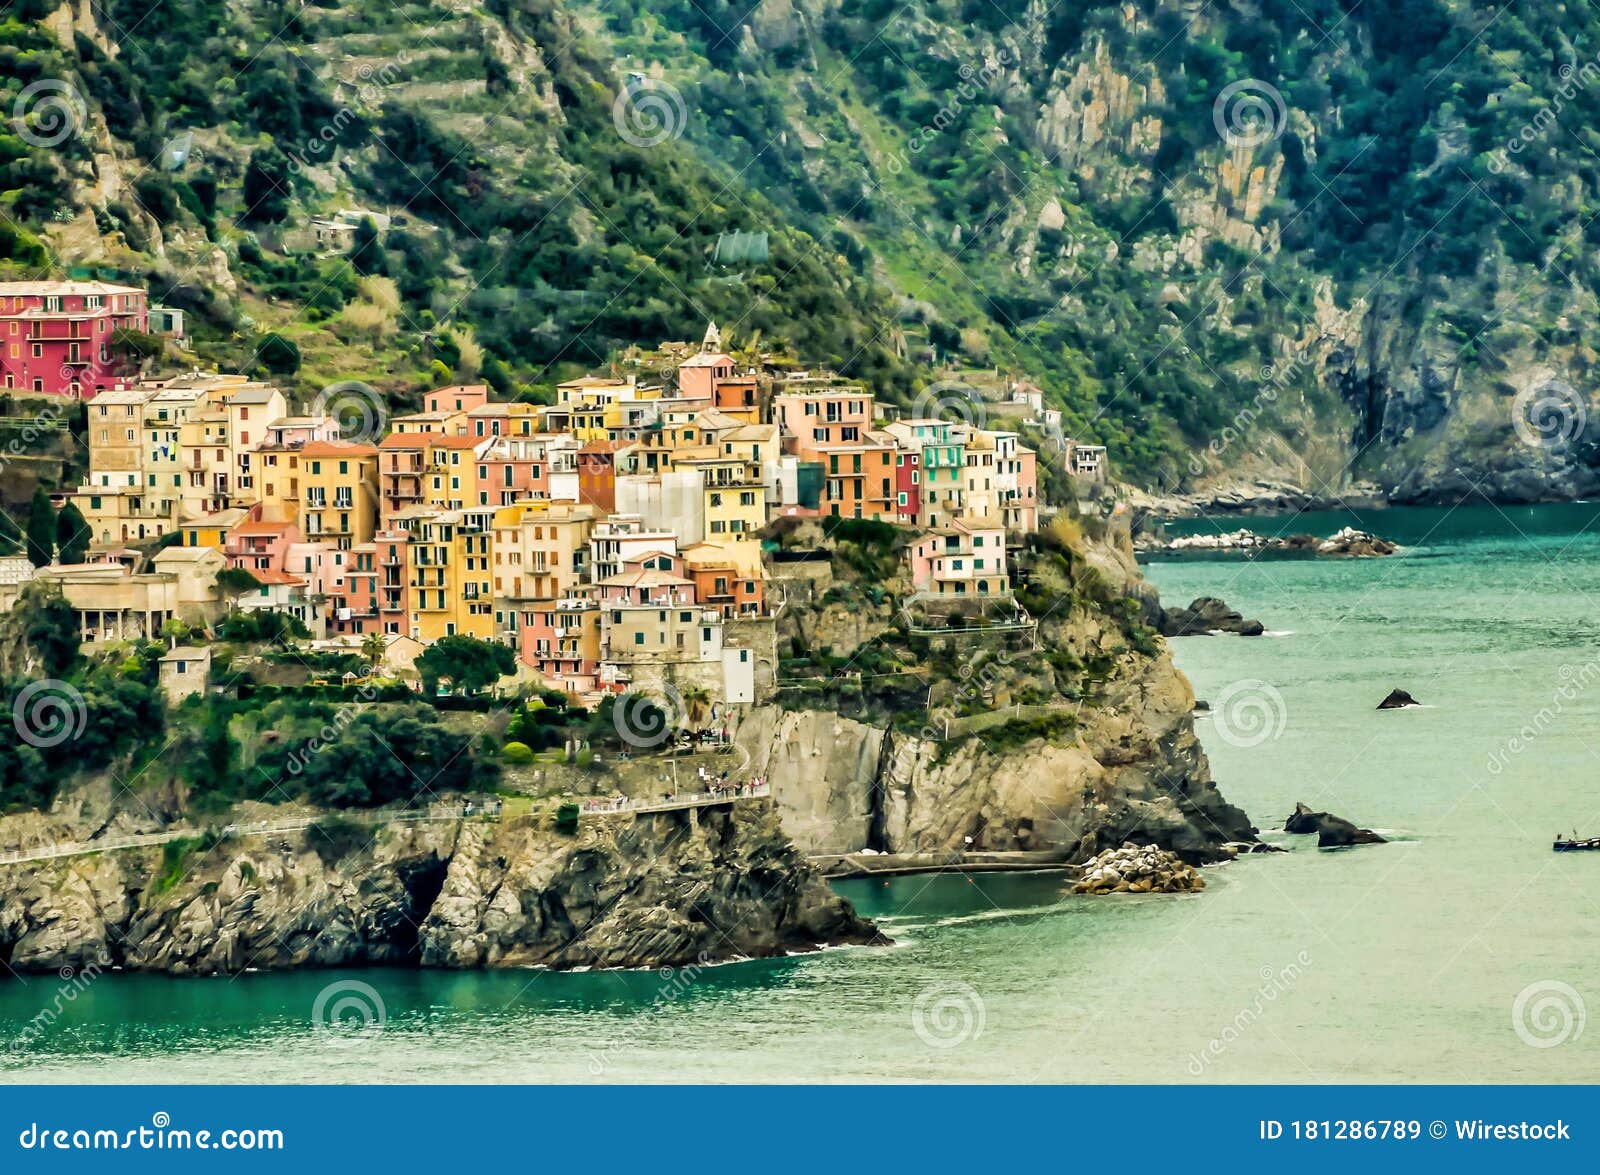 beautiful view of the houses in parco nazionale delle cinque terre by the sea, fornacchi, italy